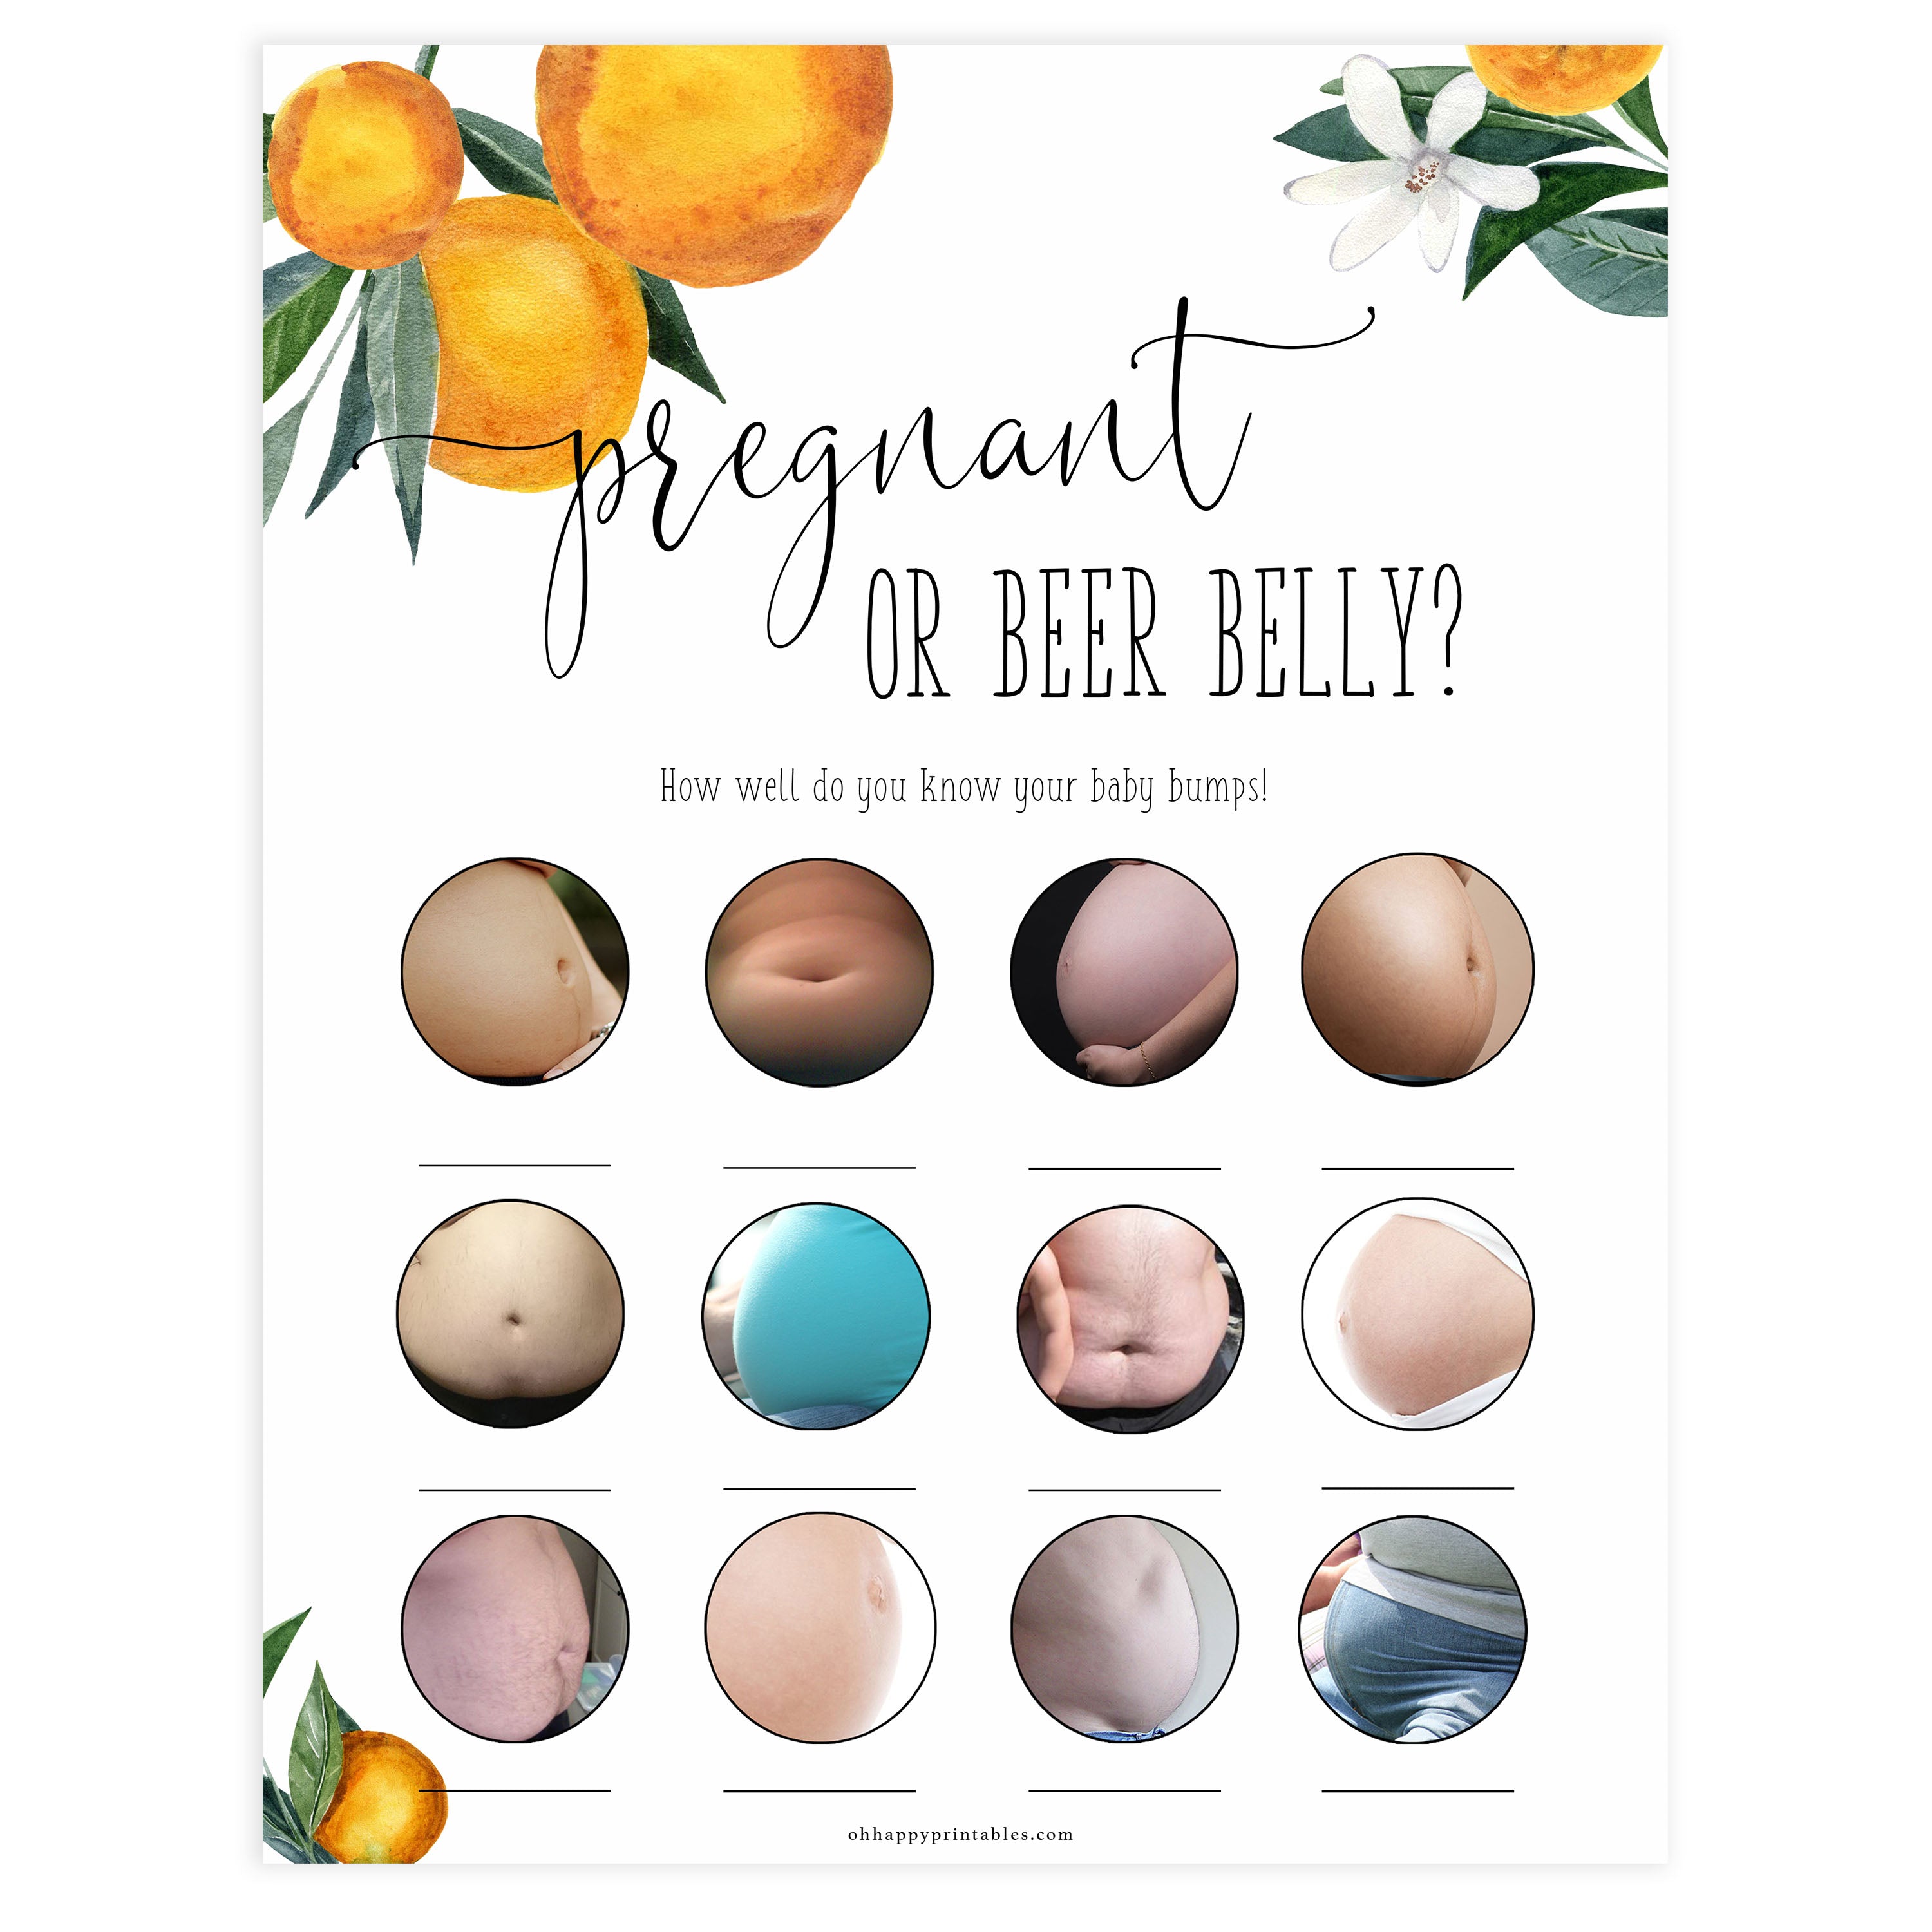 pregnant or beer belly baby game, Printable baby shower games, little cutie baby games, baby shower games, fun baby shower ideas, top baby shower ideas, little cutie baby shower, baby shower games, fun little cutie baby shower ideas, citrus baby shower games, citrus baby shower, orange baby shower